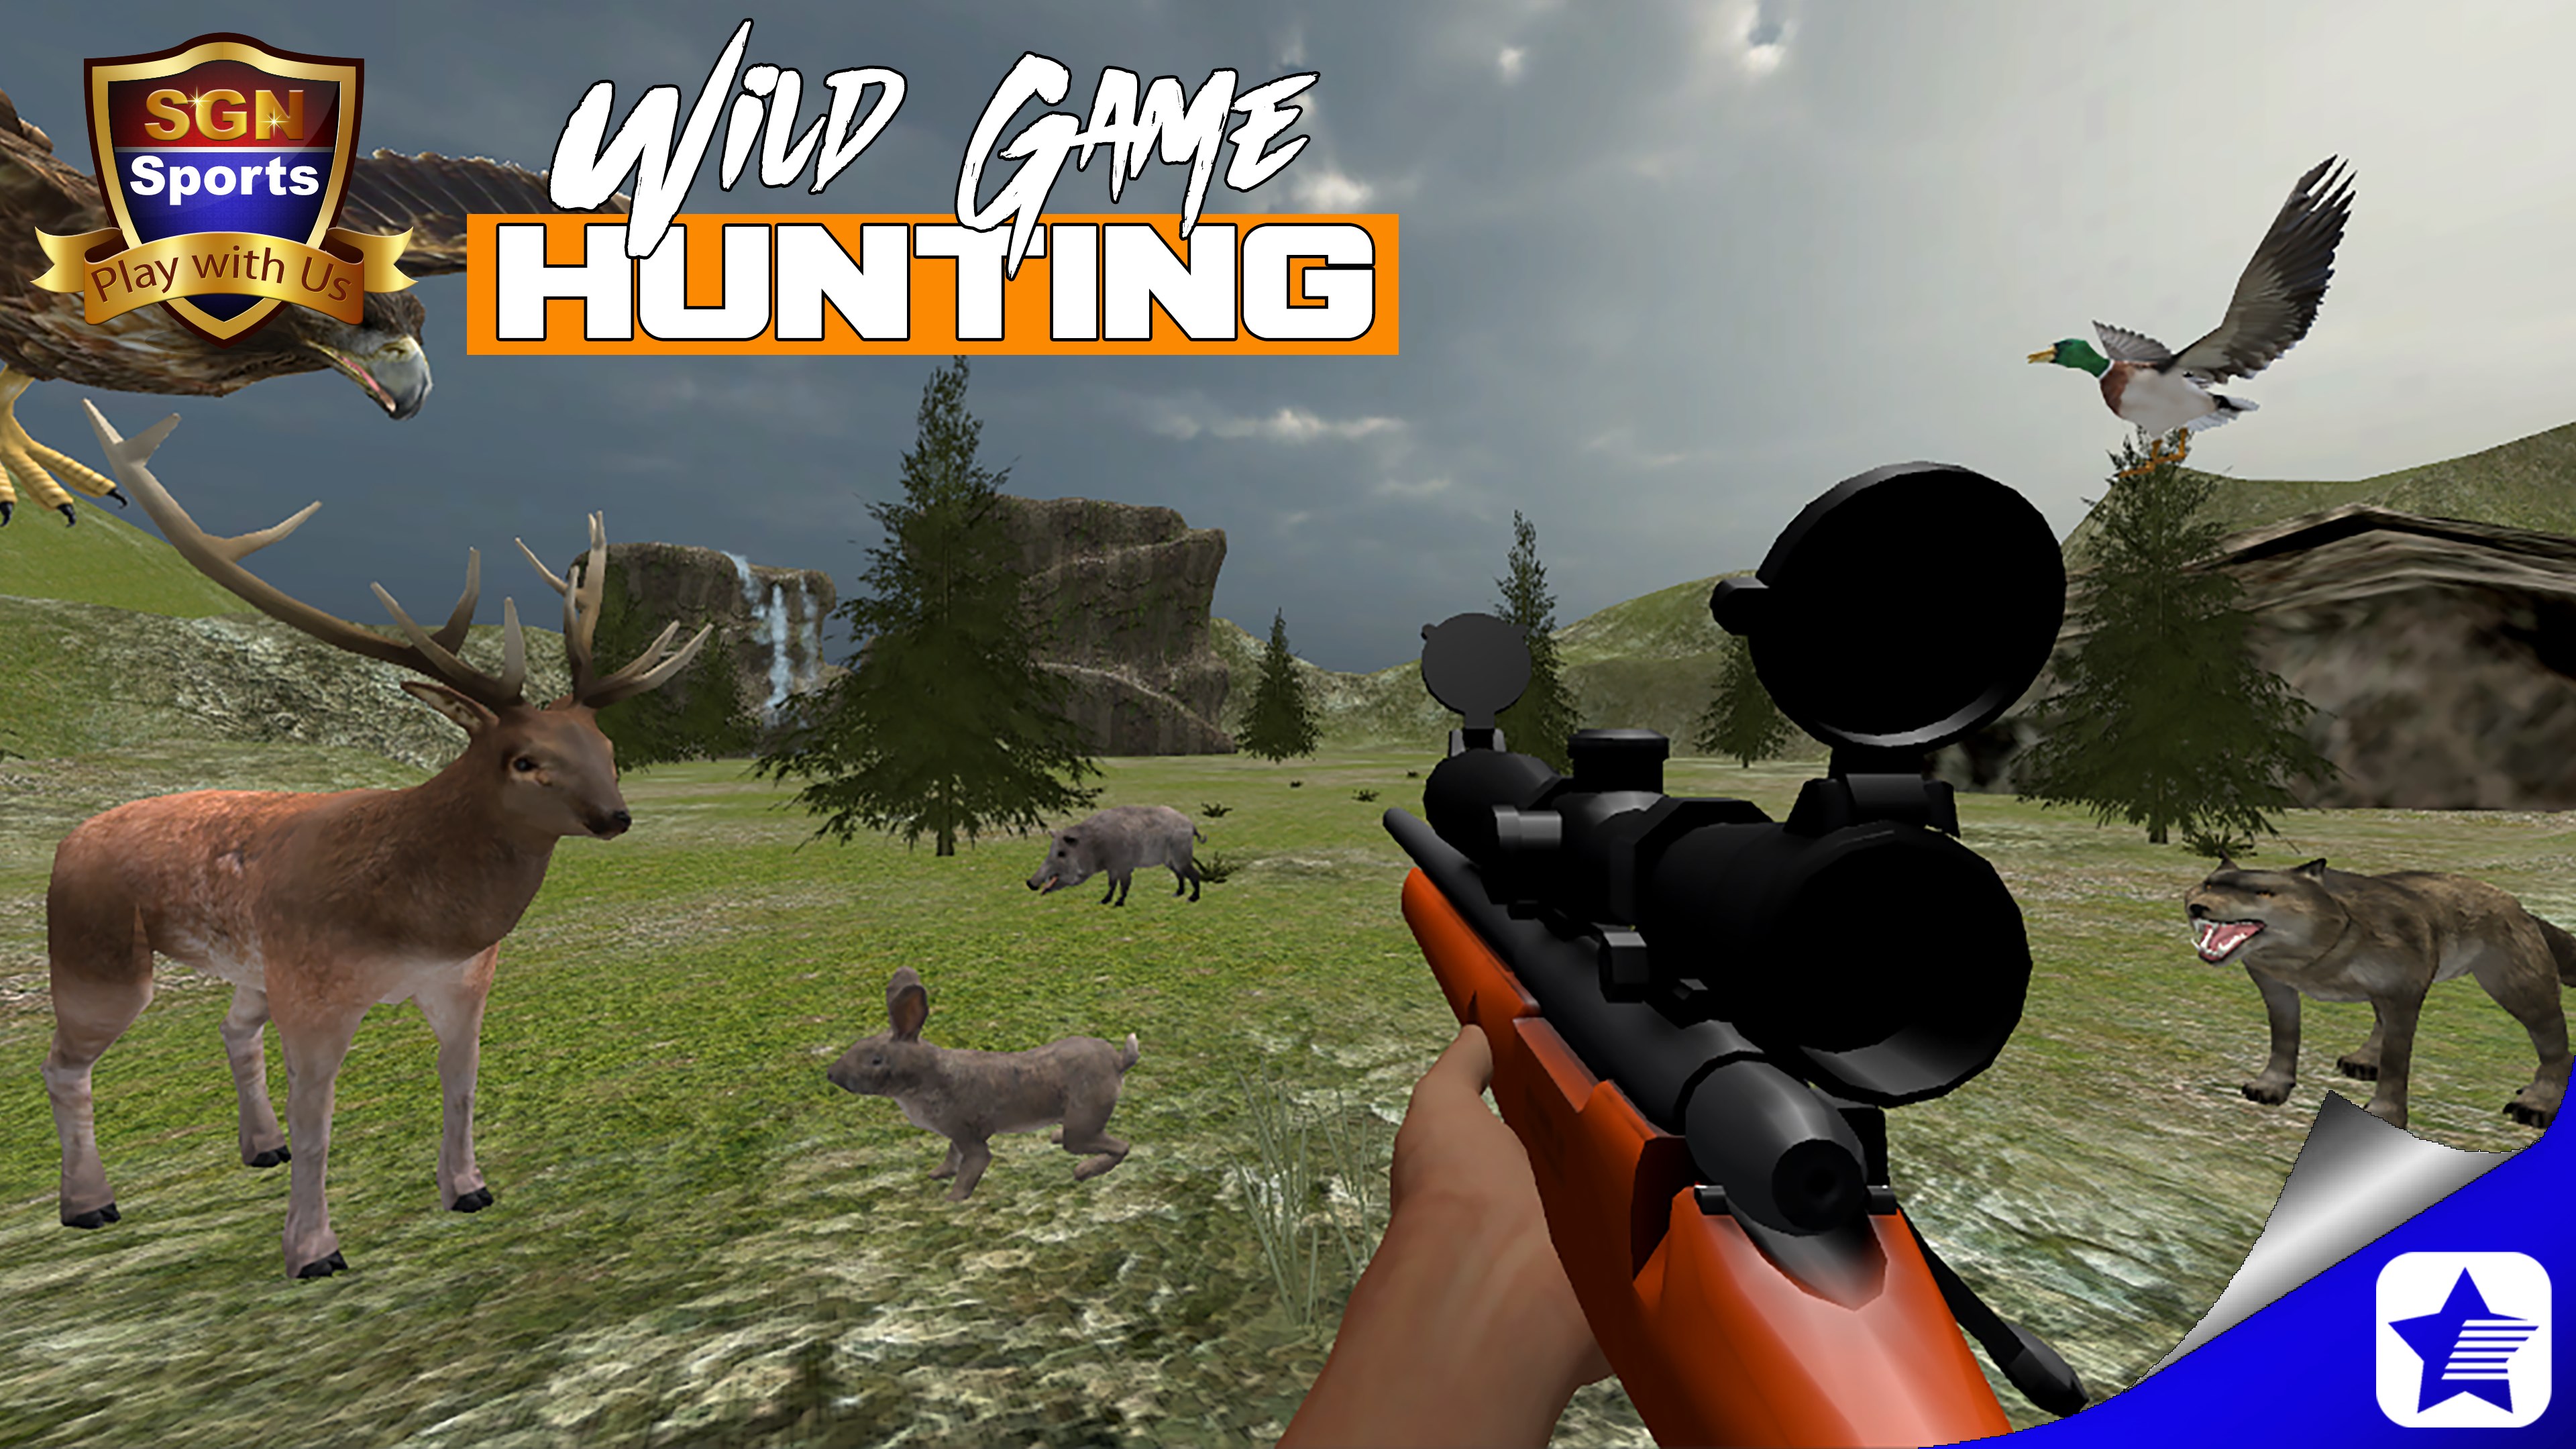 Buy SGN Sports Wild Game Hunting